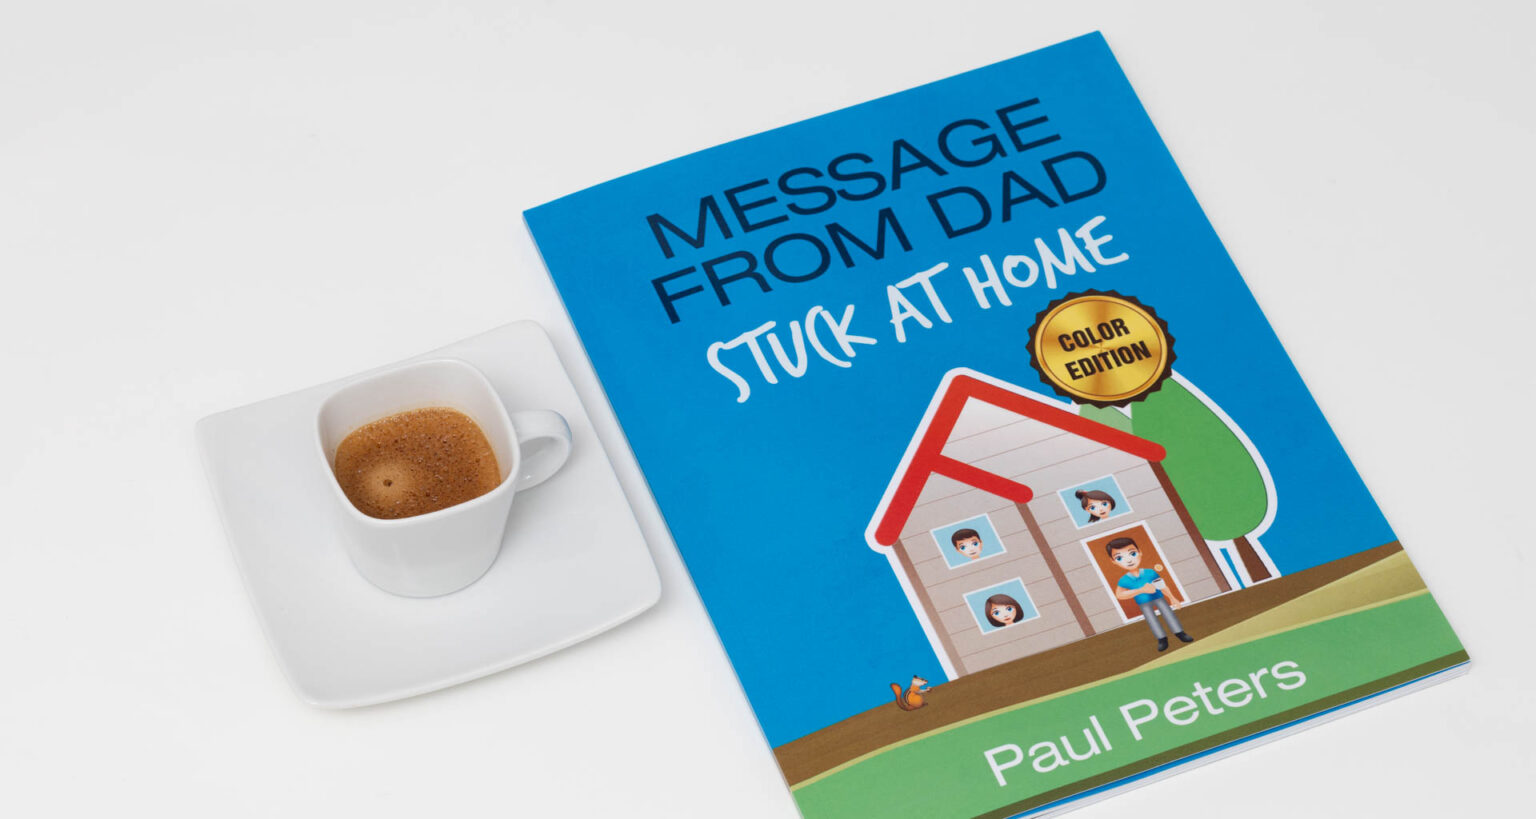 The book Message from Dad—Stuck at Home is a hilarious look back at the lockdowns of 2020. Image: Digitized House.